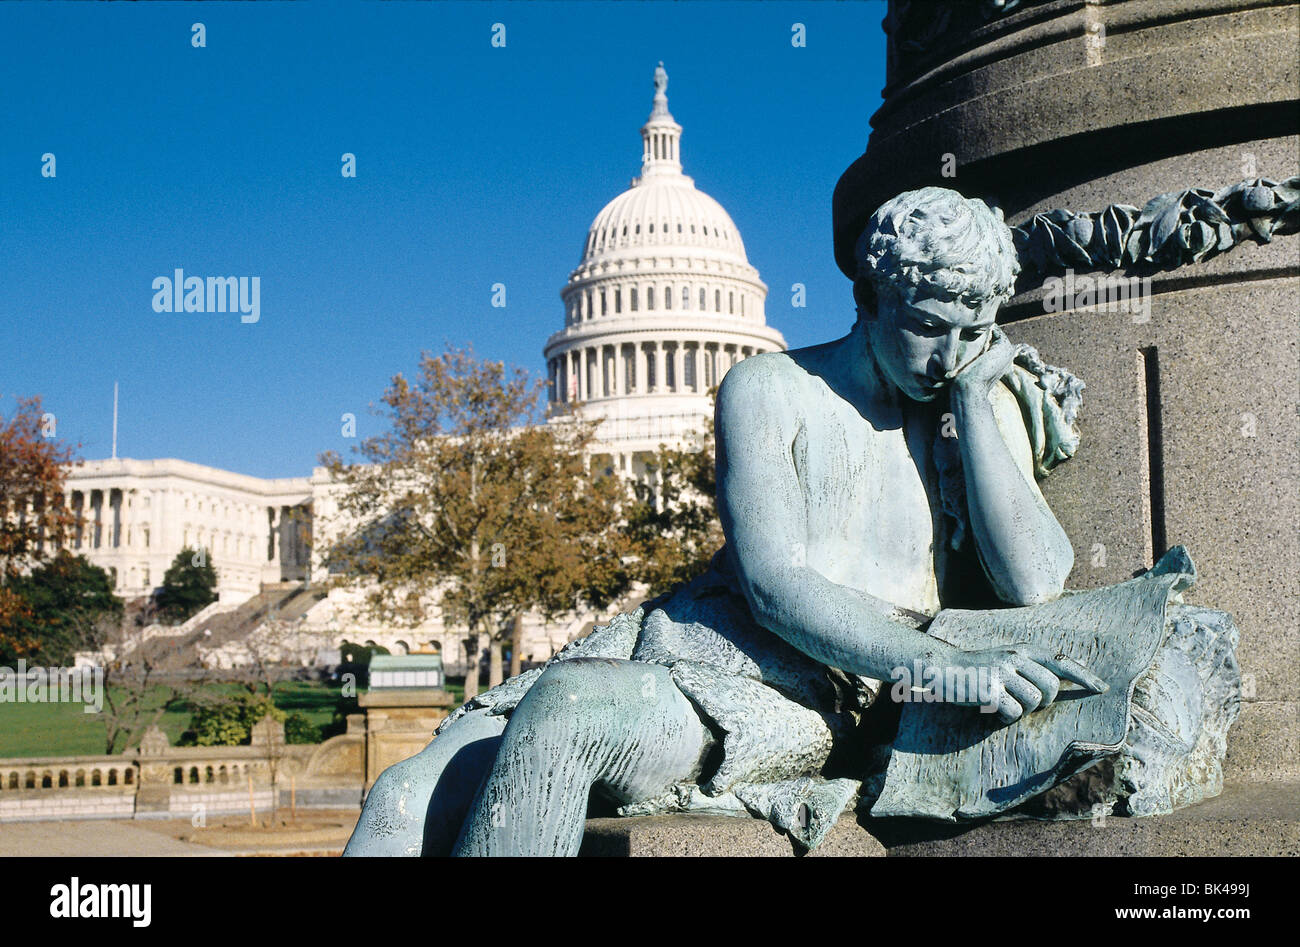 Bronze sculpture and the U.S. Capitol Building in Washington, D.C. Stock Photo